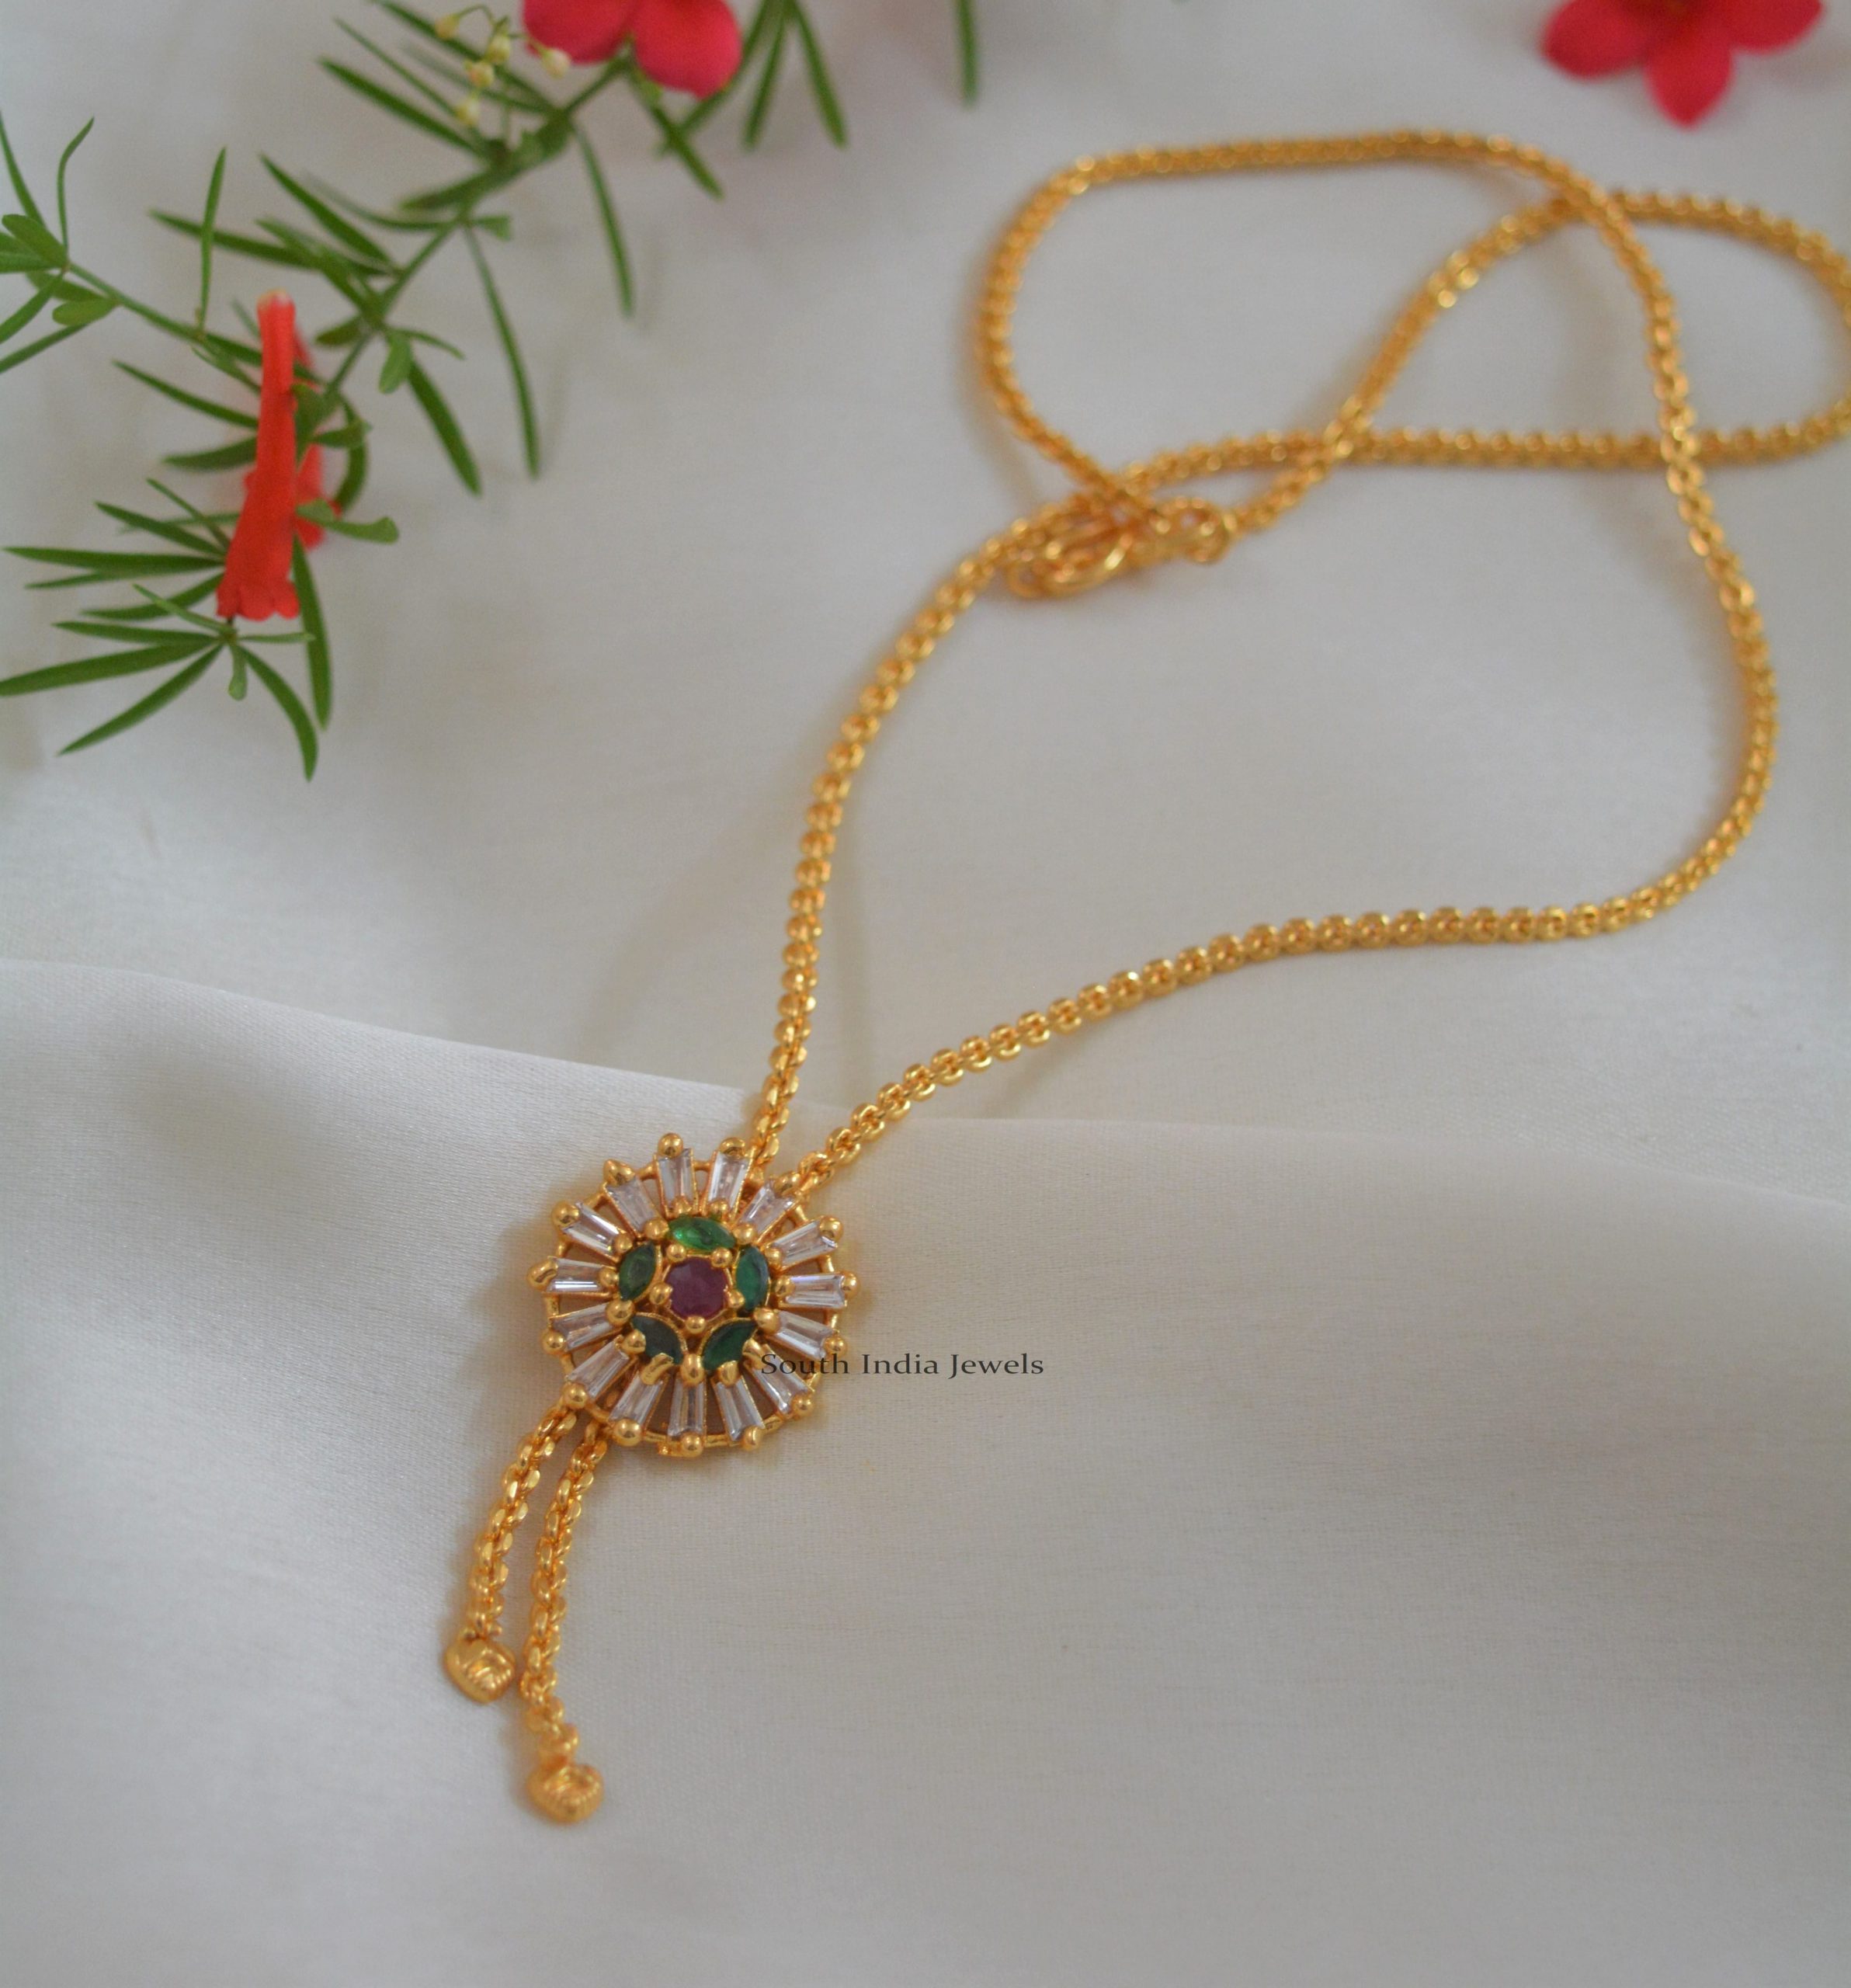 Trendy Gold Finish Chain with Pendant